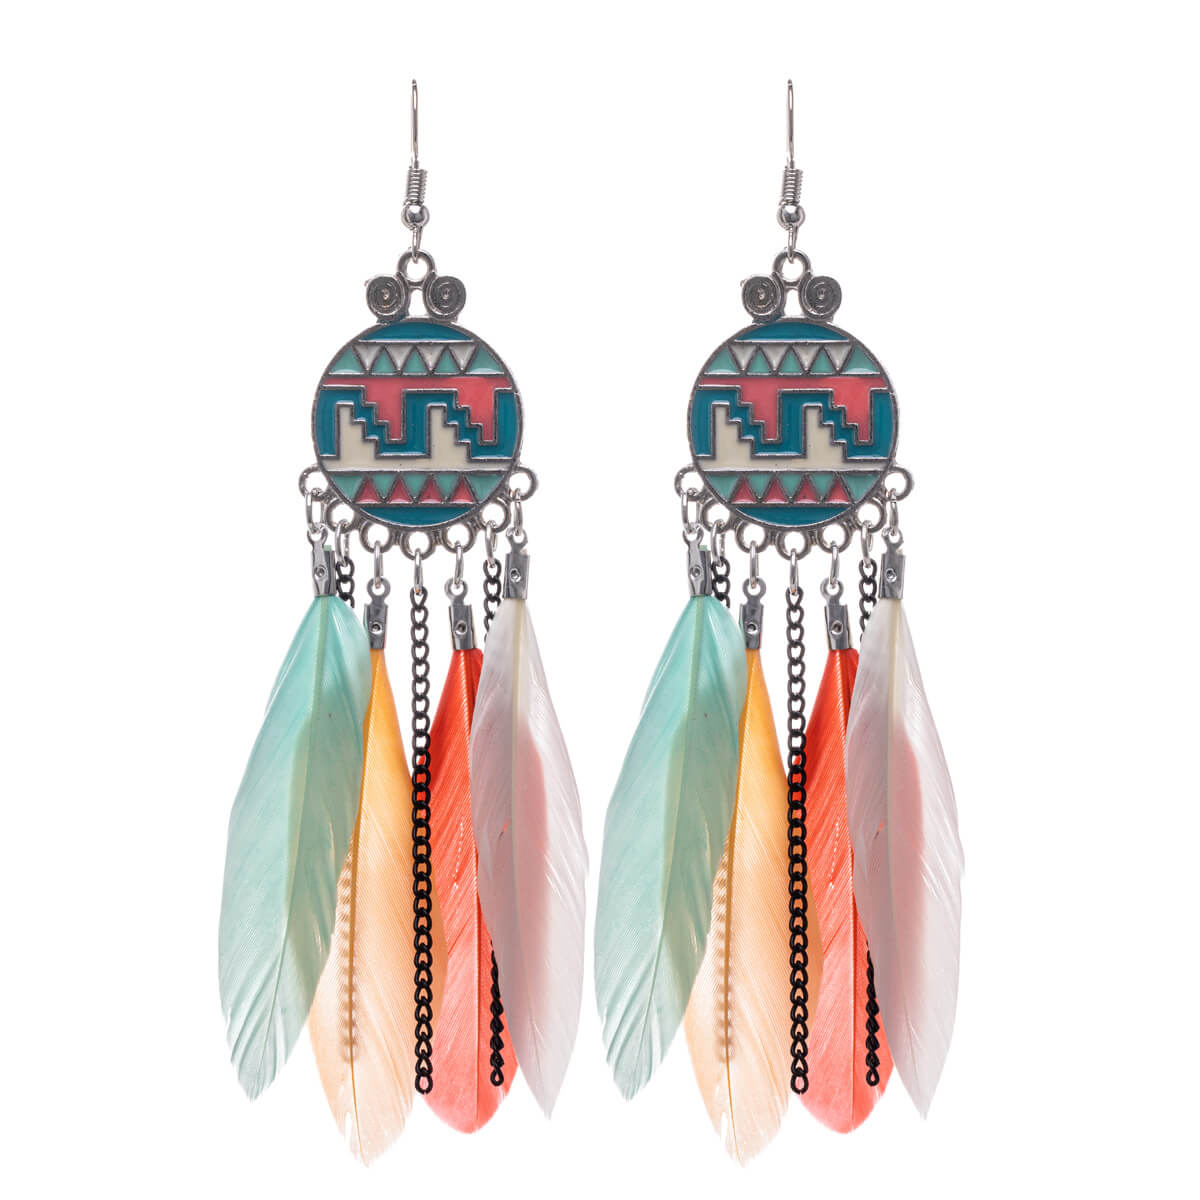 Big feather earrings with chains